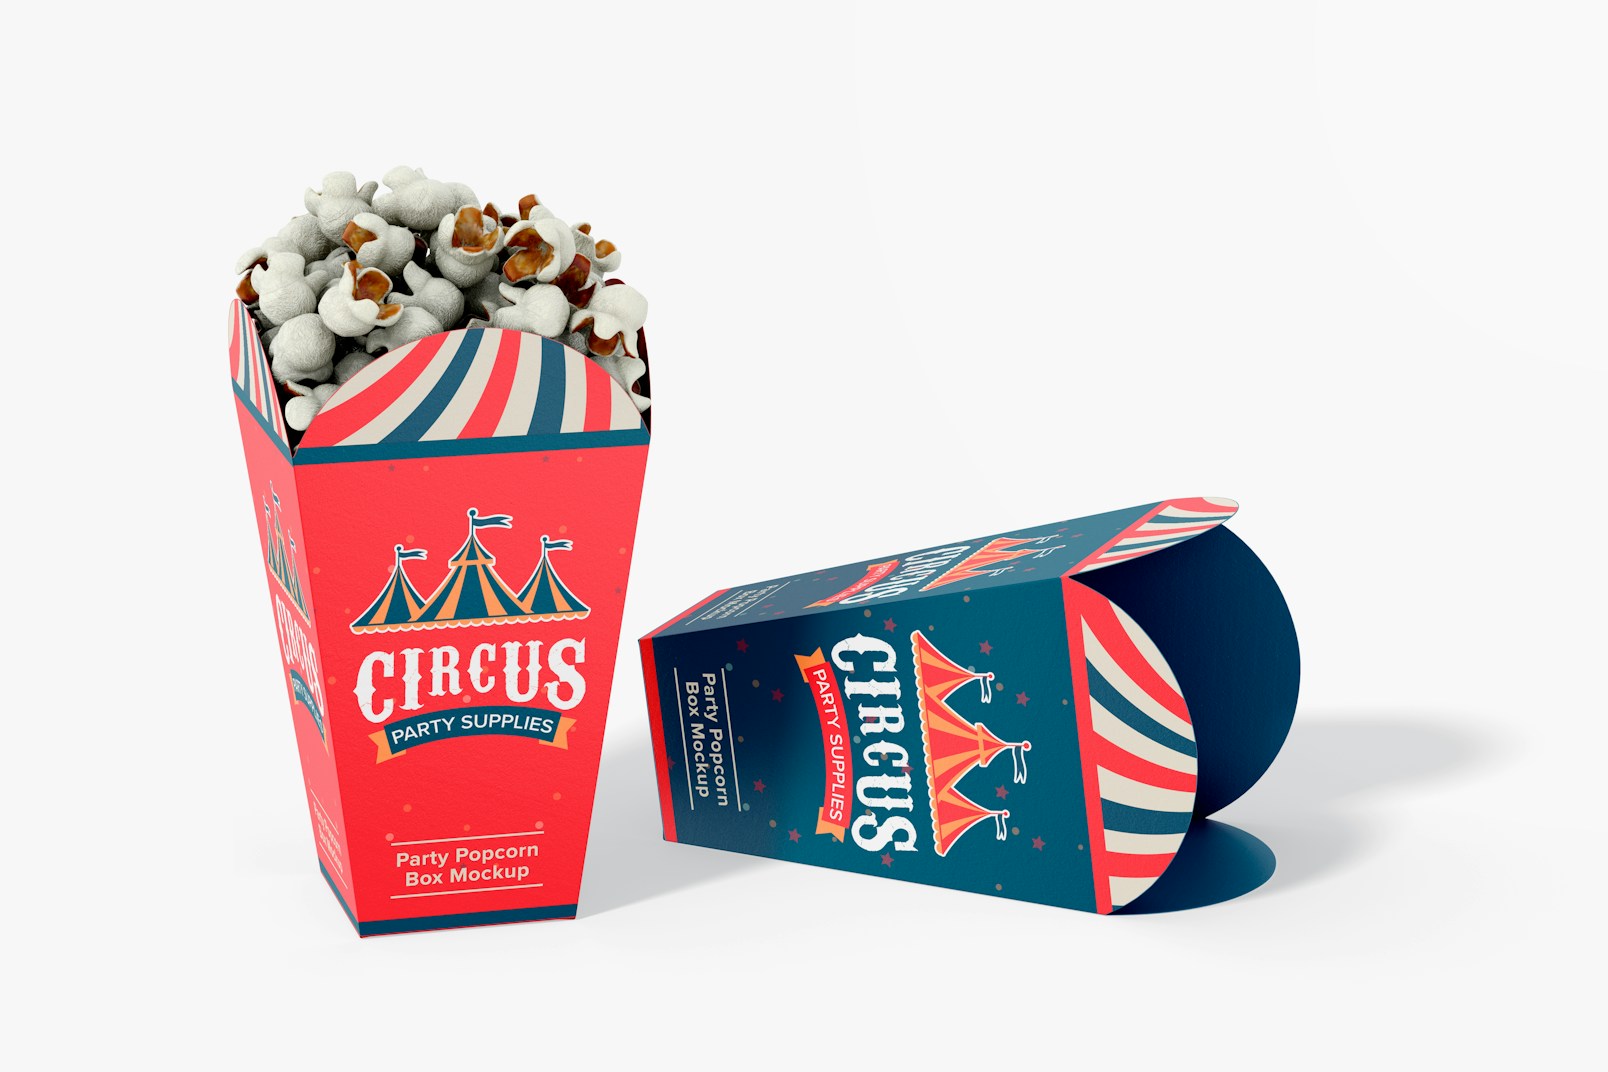 Party Popcorn Boxes Mockup, Standing and Dropped